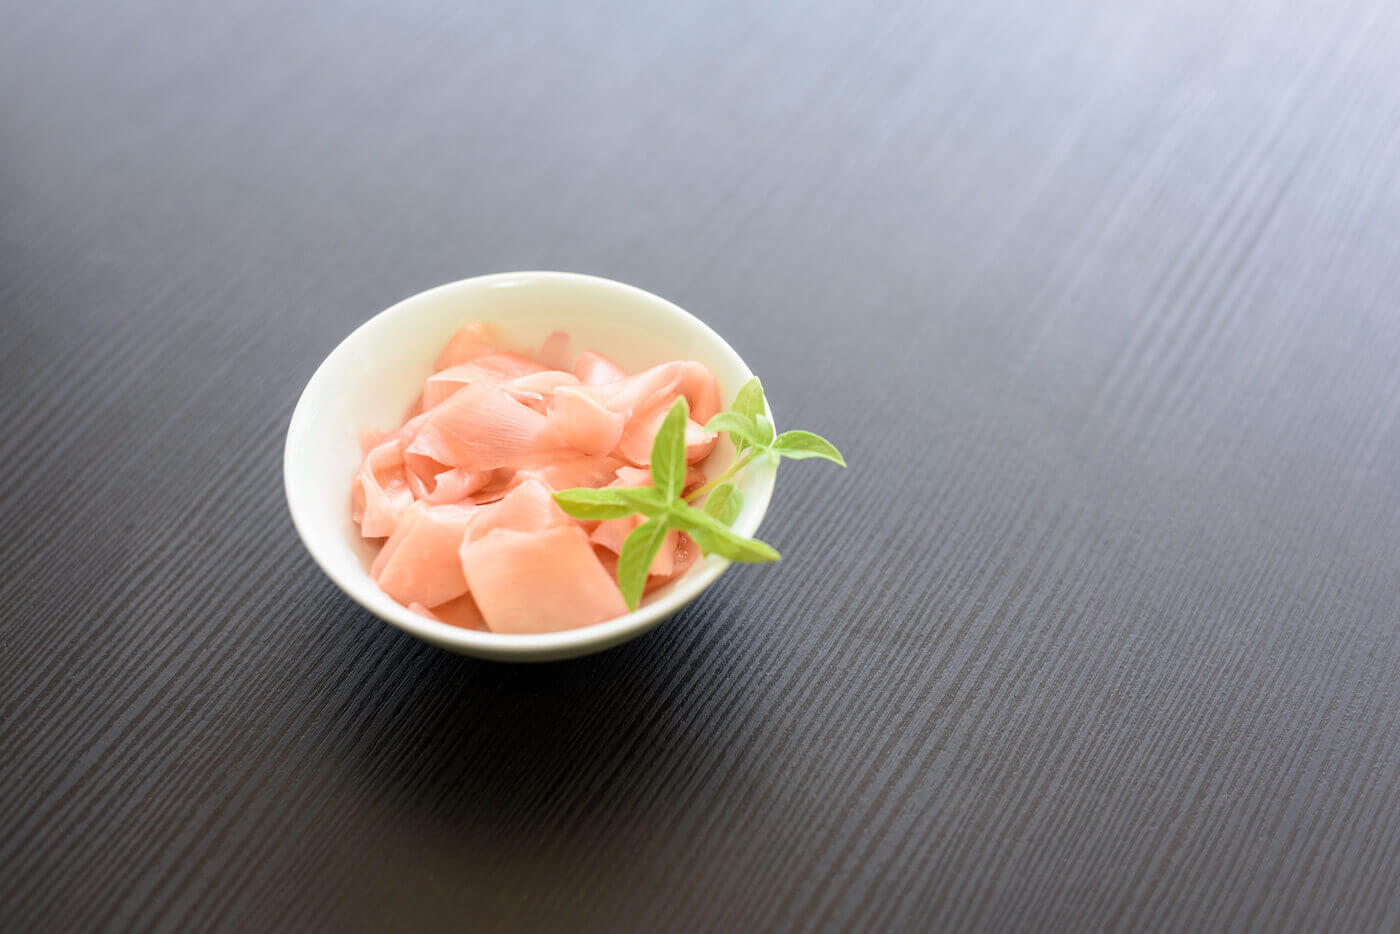 Pink ginger in a white bowl